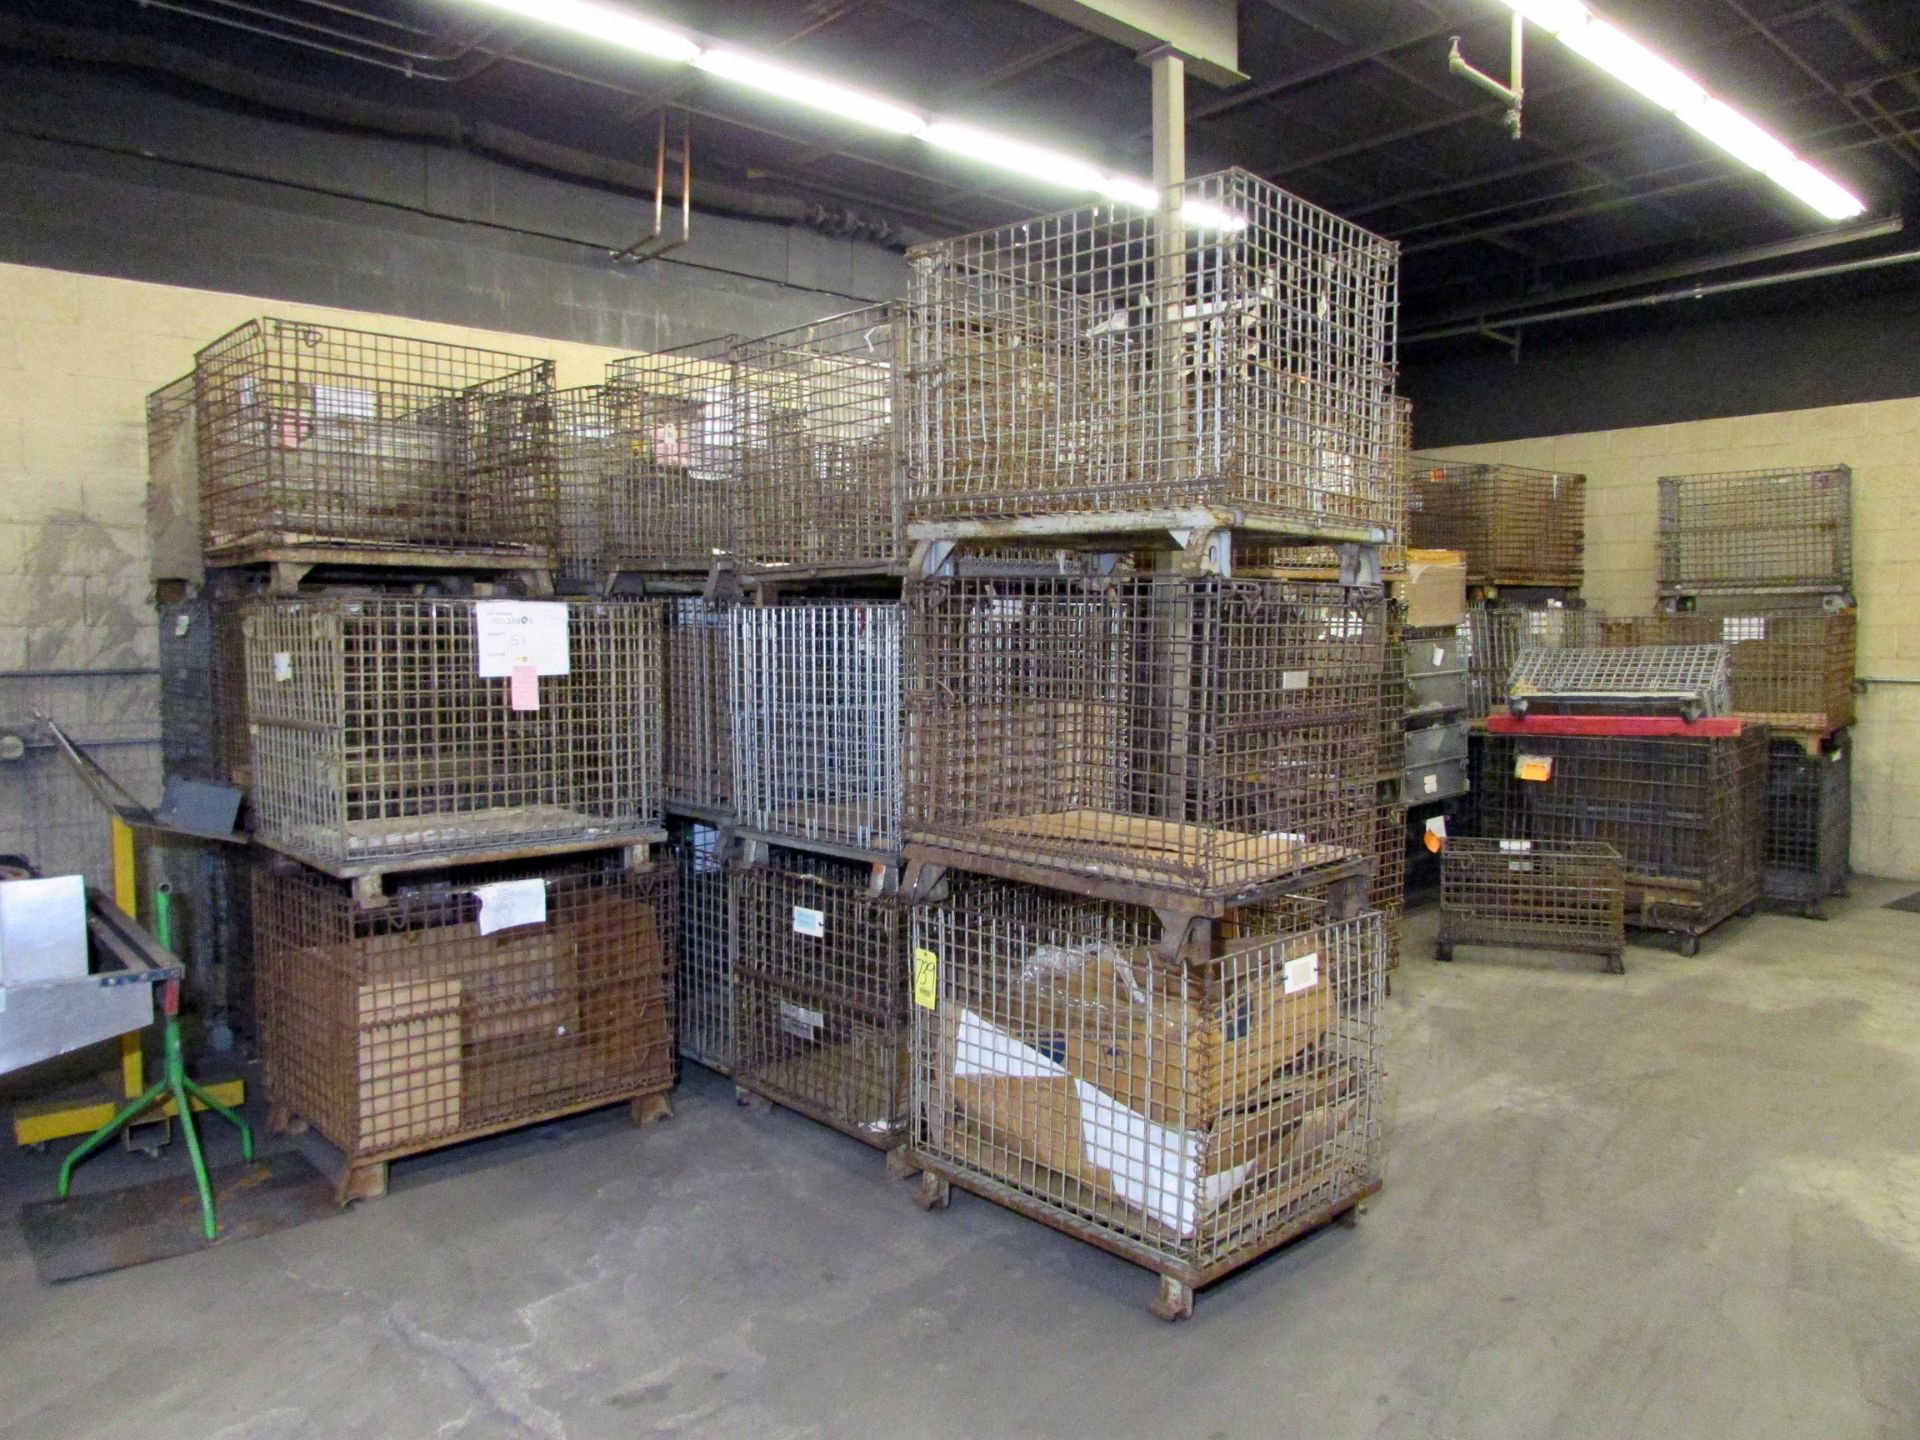 LOT OF COLLAPSIBLE WIRE BASKETS, large quantity & various sizes